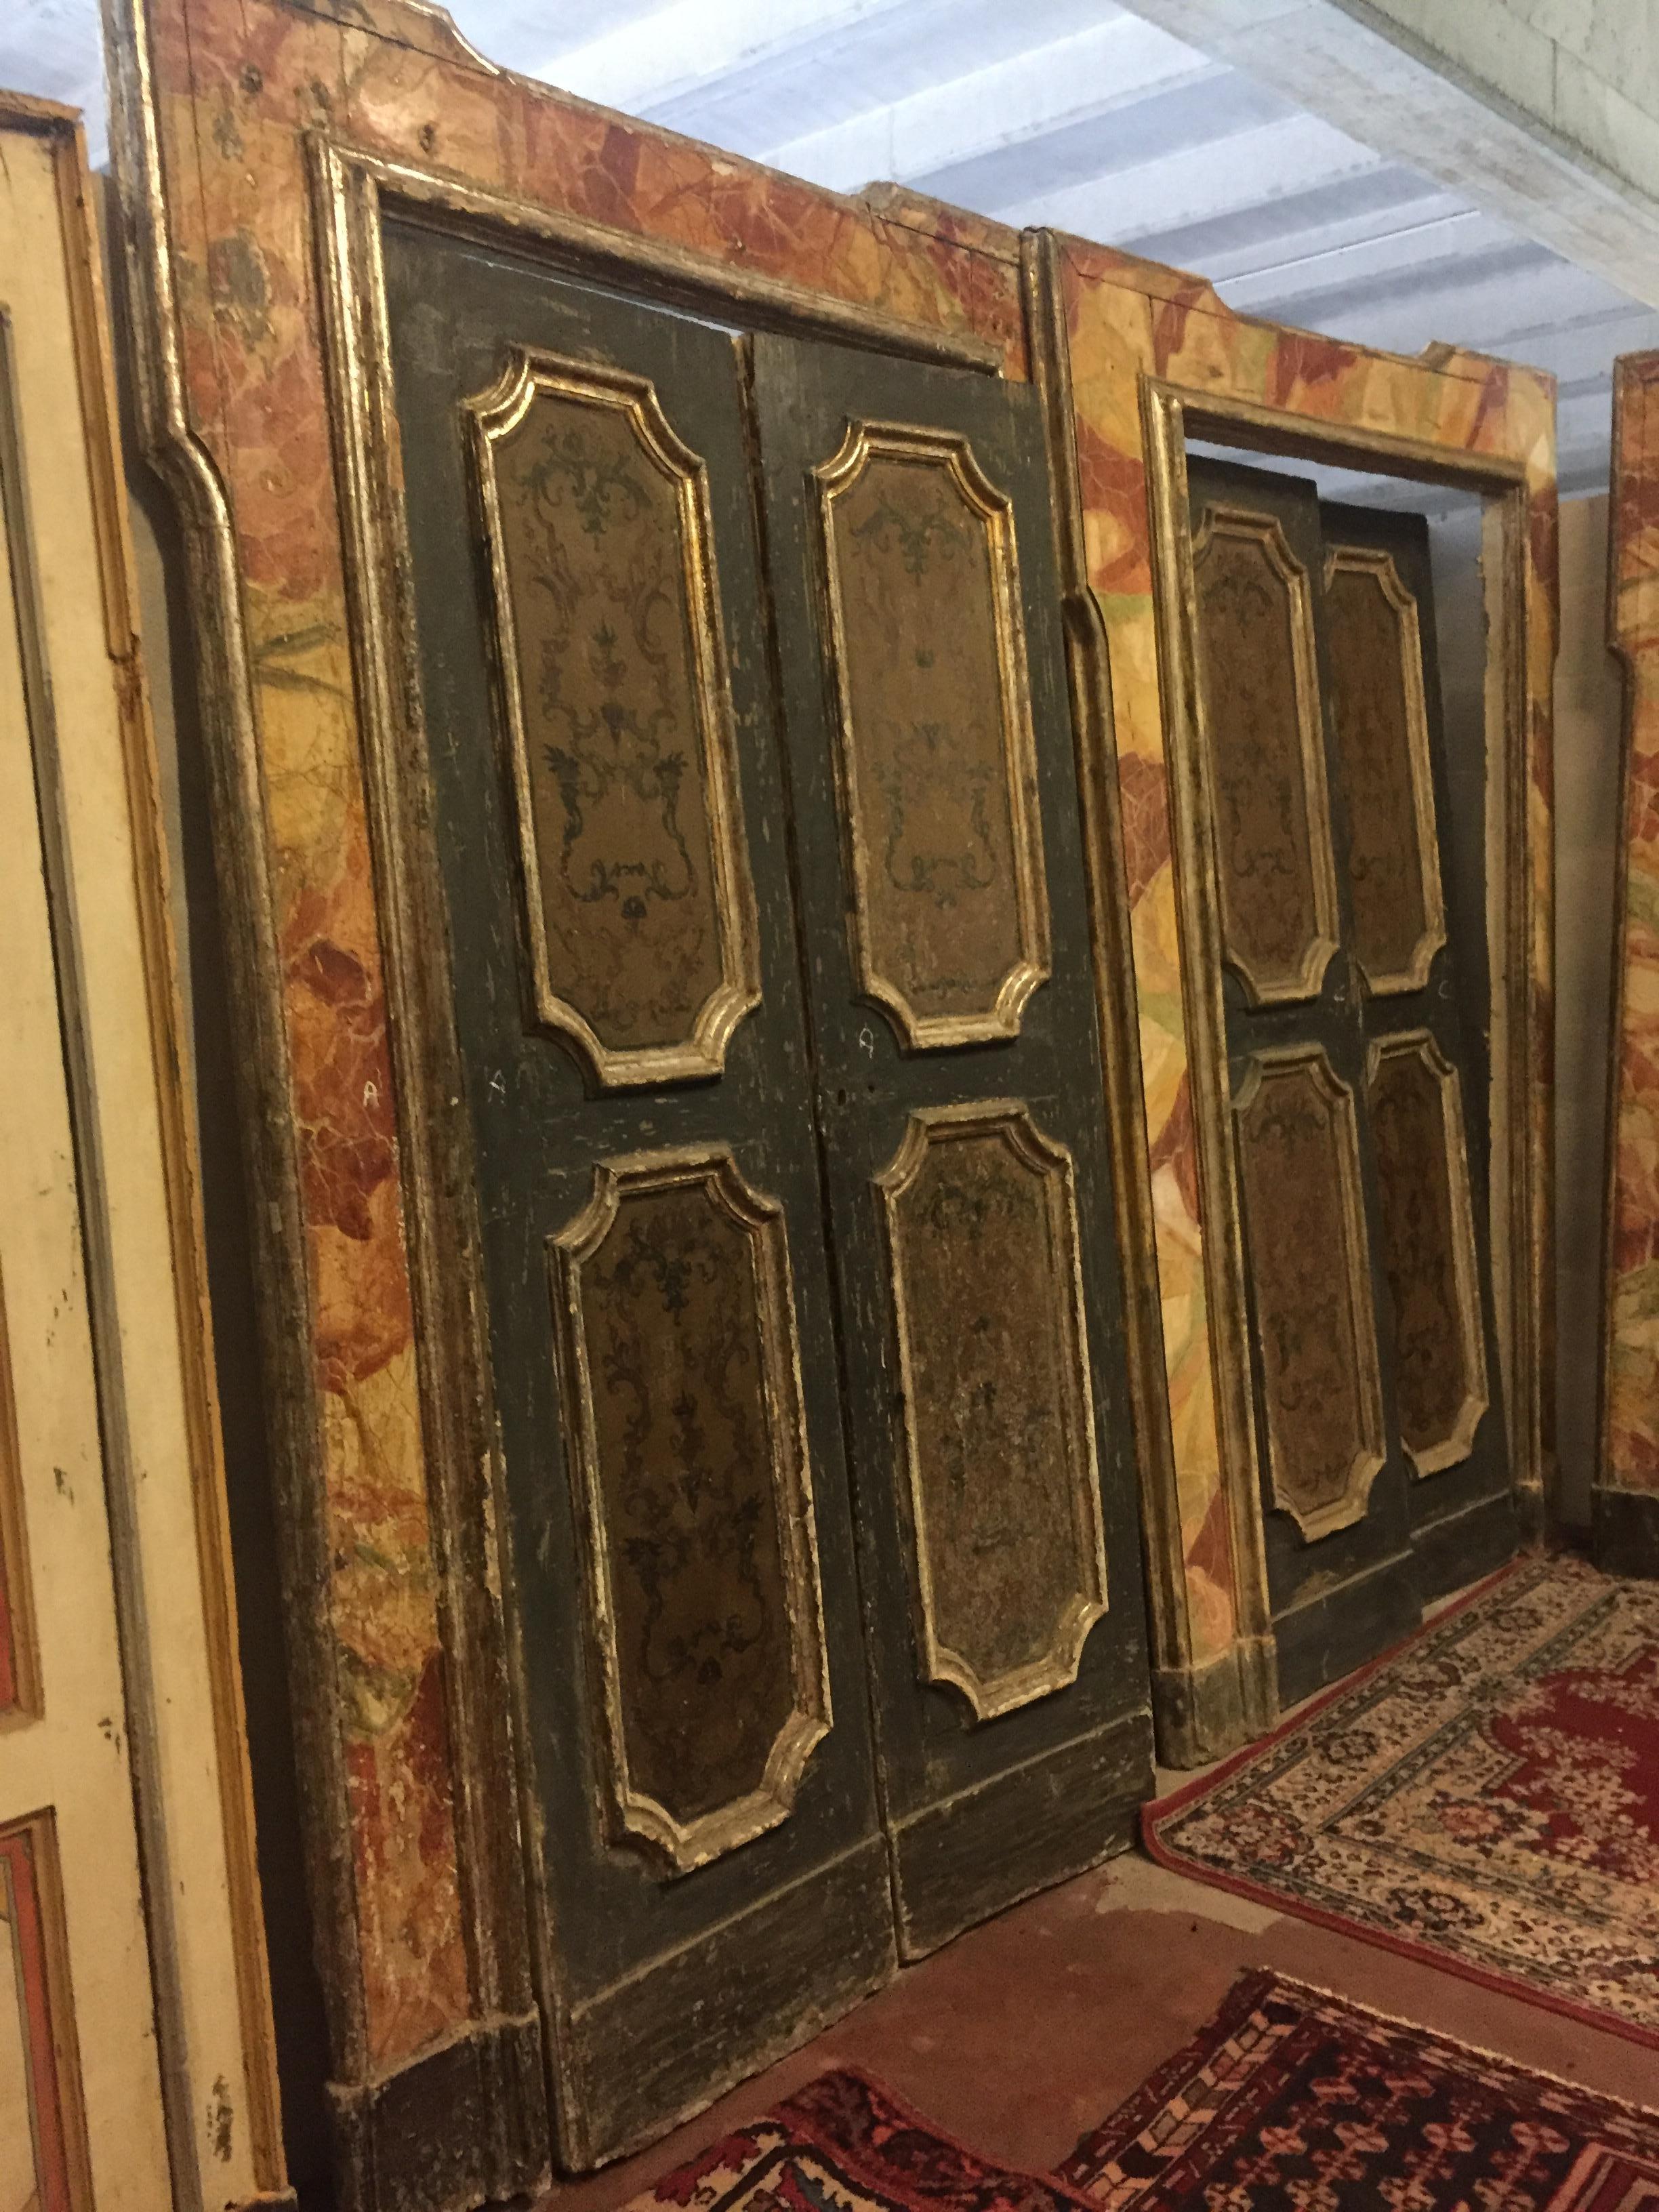 Antique set of 4 double-leaf indoor doors, with lacquered frame in imitation peach-colored marble, with orange, yellow and green.
The doors have golden and silvery molures, they are a dark green color, with original hand painted paintings from the